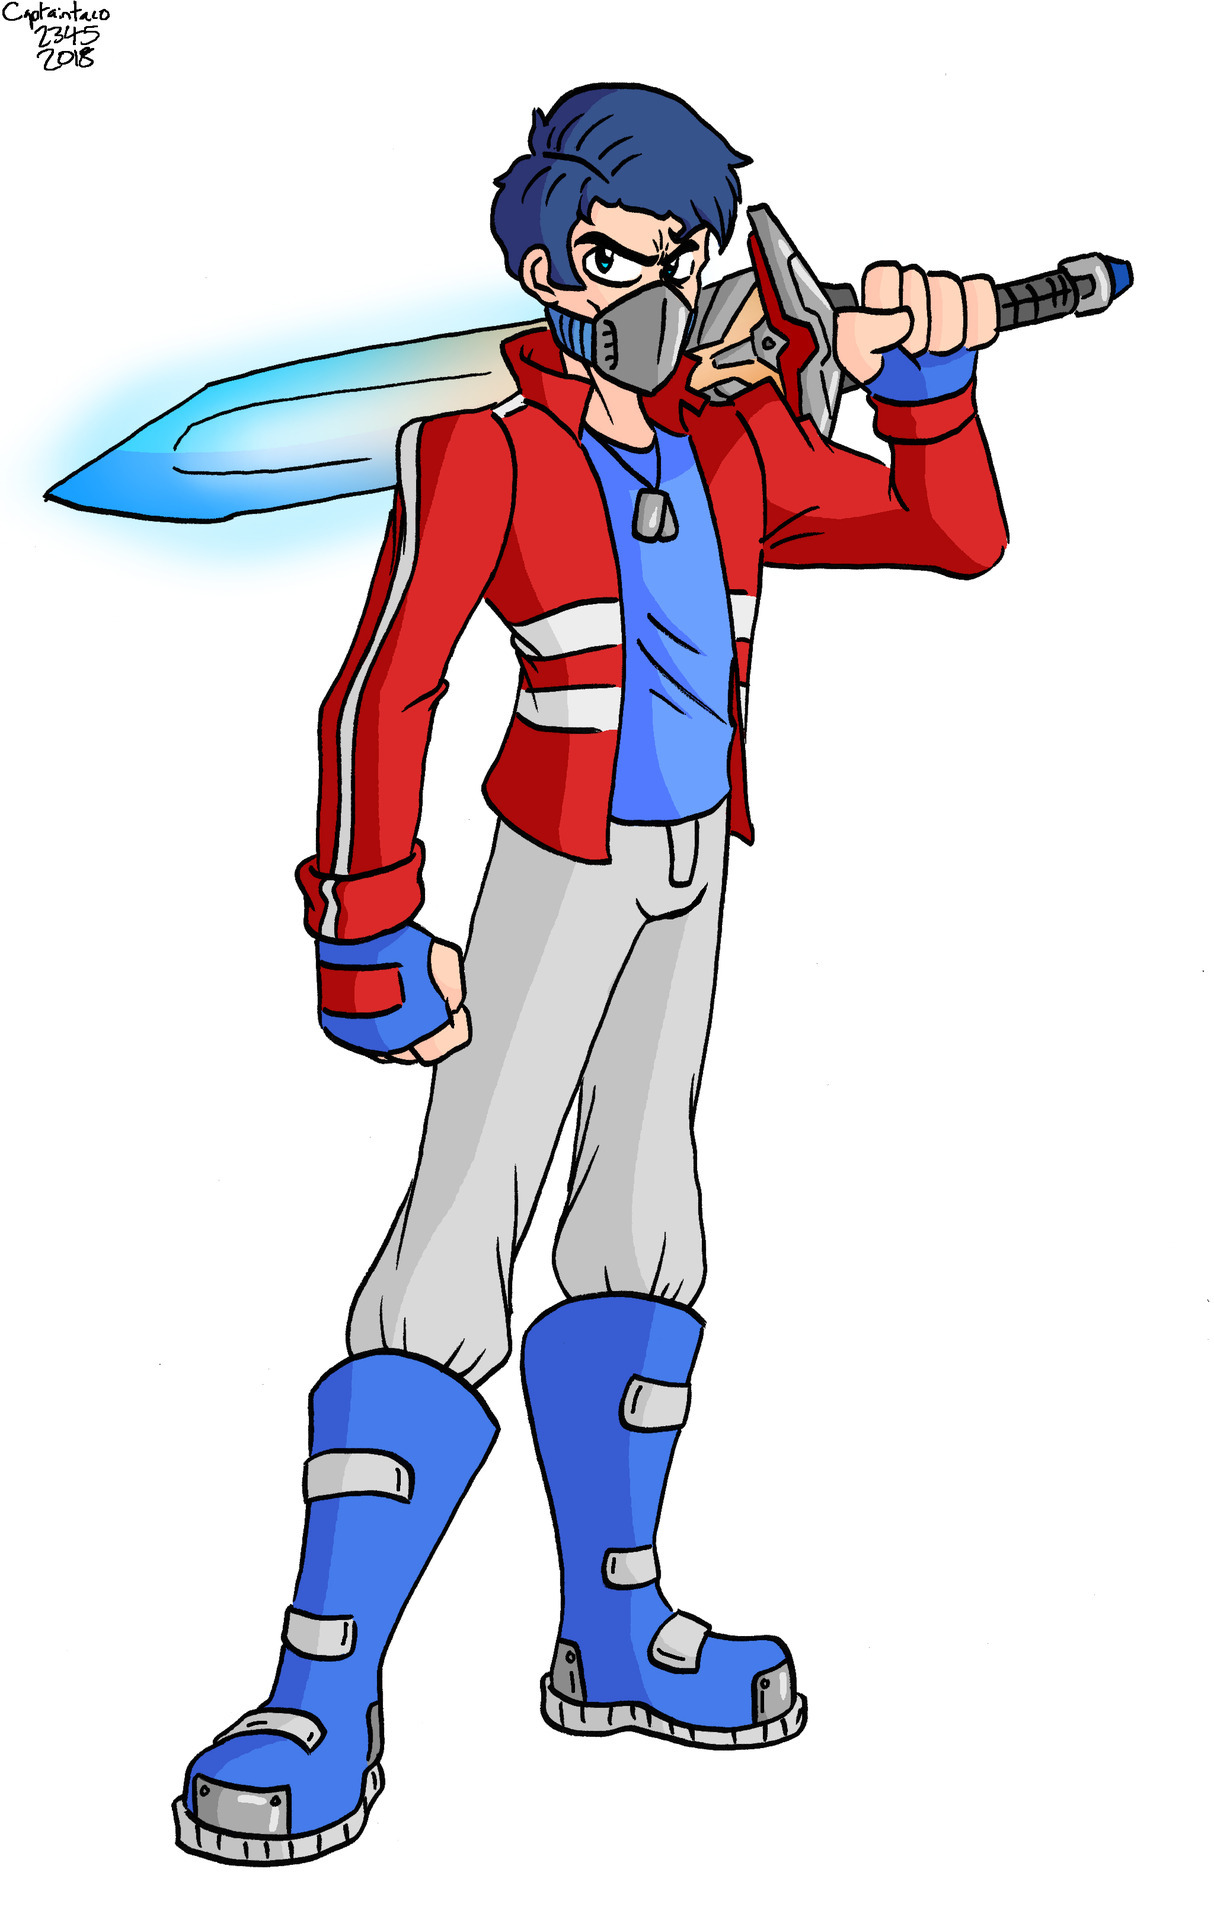 Optimus Prime as a human. I had an idea for a story about humanized Transformers